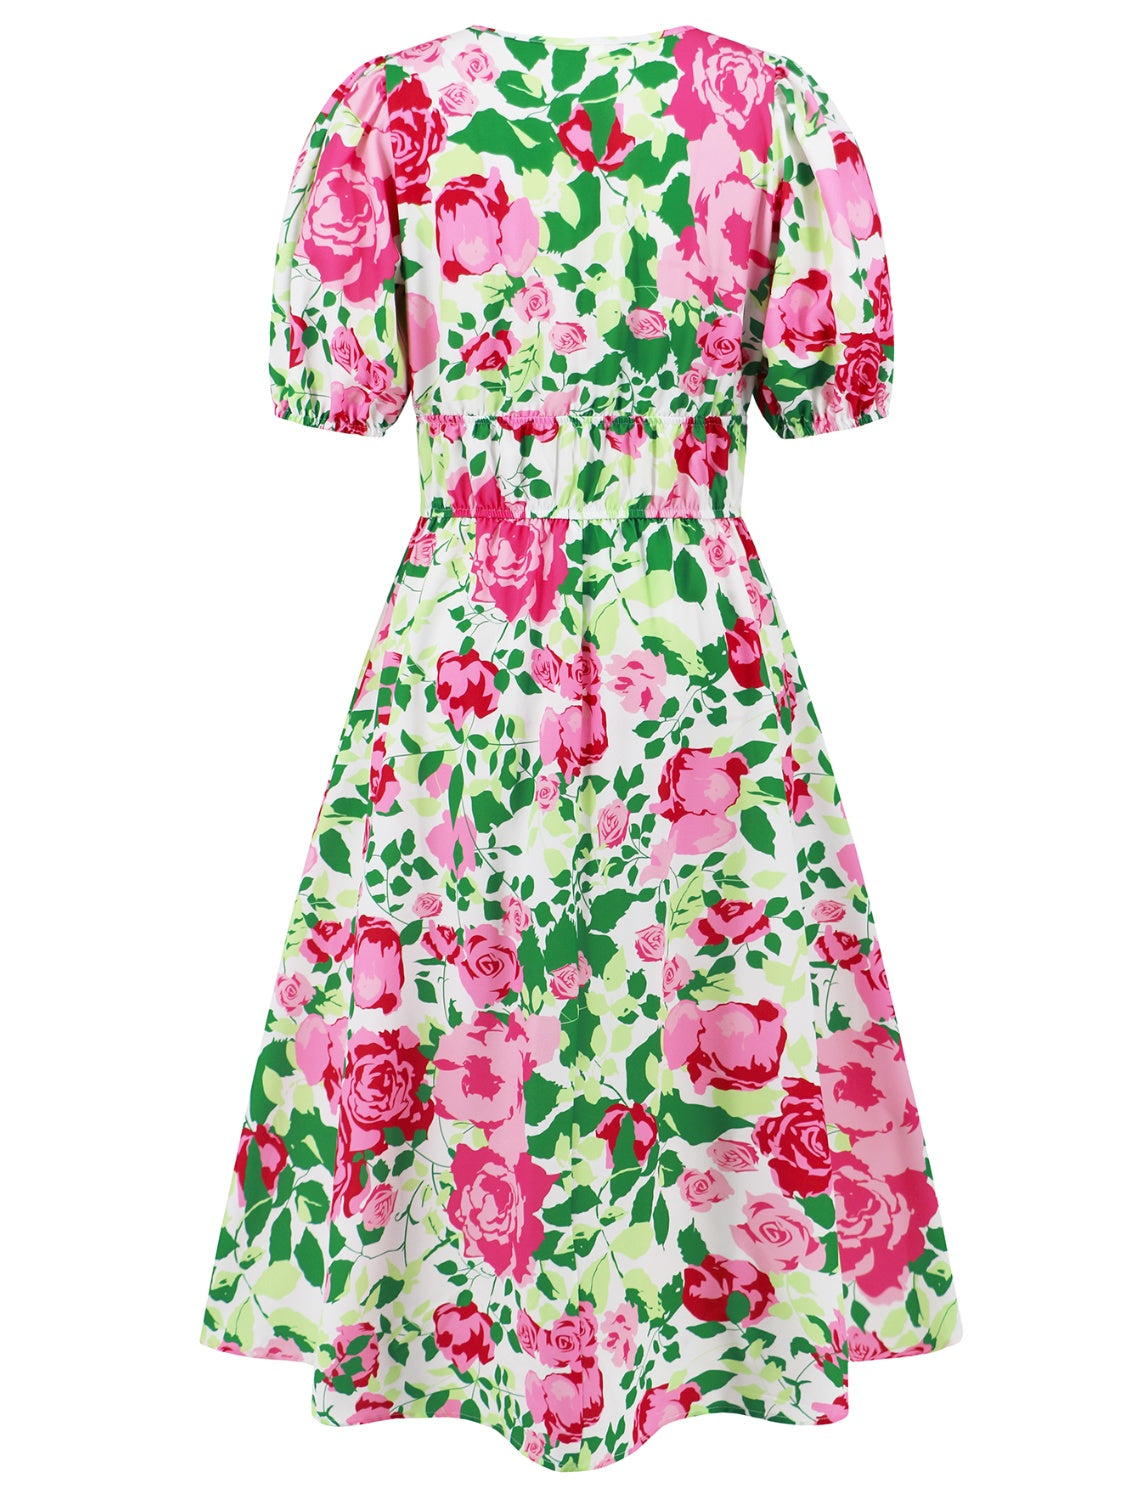 PREORDER- Ruched Printed Surplice Short Sleeve Dress